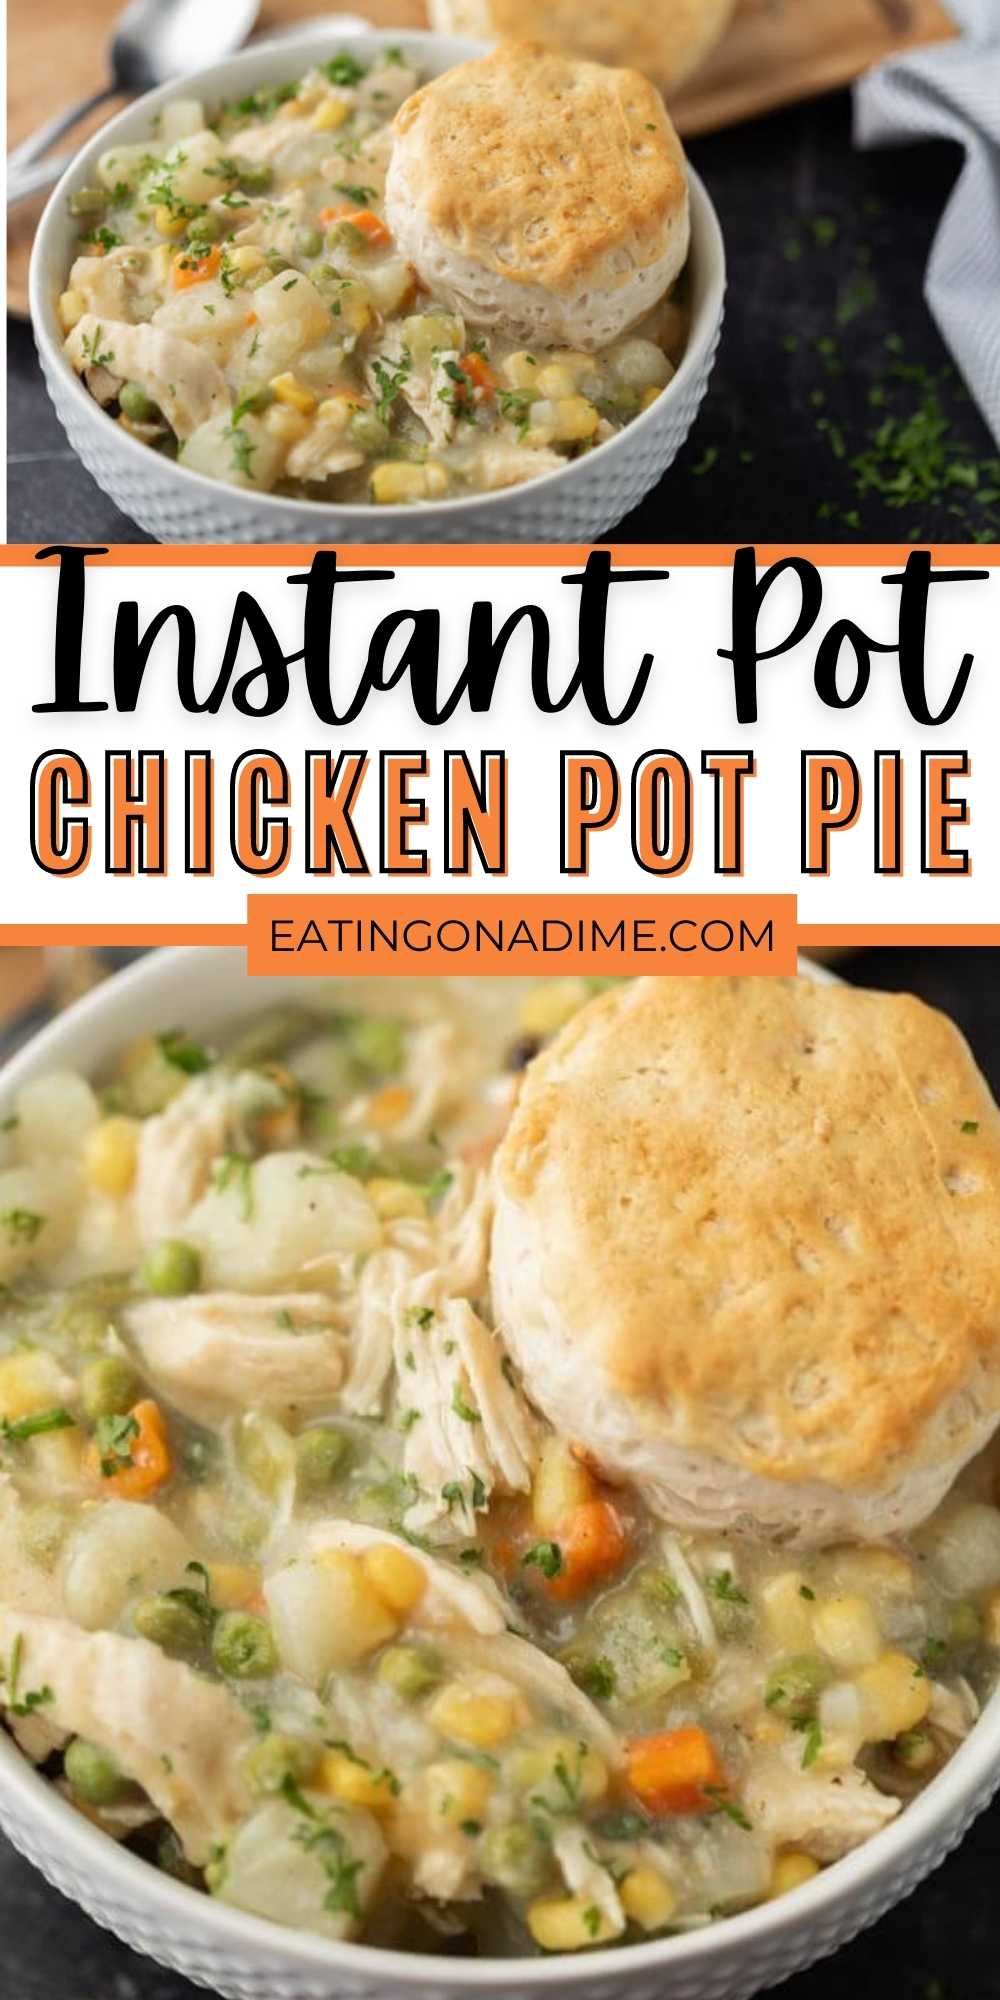 You are going to love this easy Instant Pot Chicken Pot Pie Recipe. It is the best pot pie recipe and its ready in under an hour! This easy Pressure Cooker Chicken Pot pie is simple to make and has all the flavors of a traditional pot pie.  #eatinongadime #instantpotrecipes #pressurecookerrecipes #chickenpotpie 
